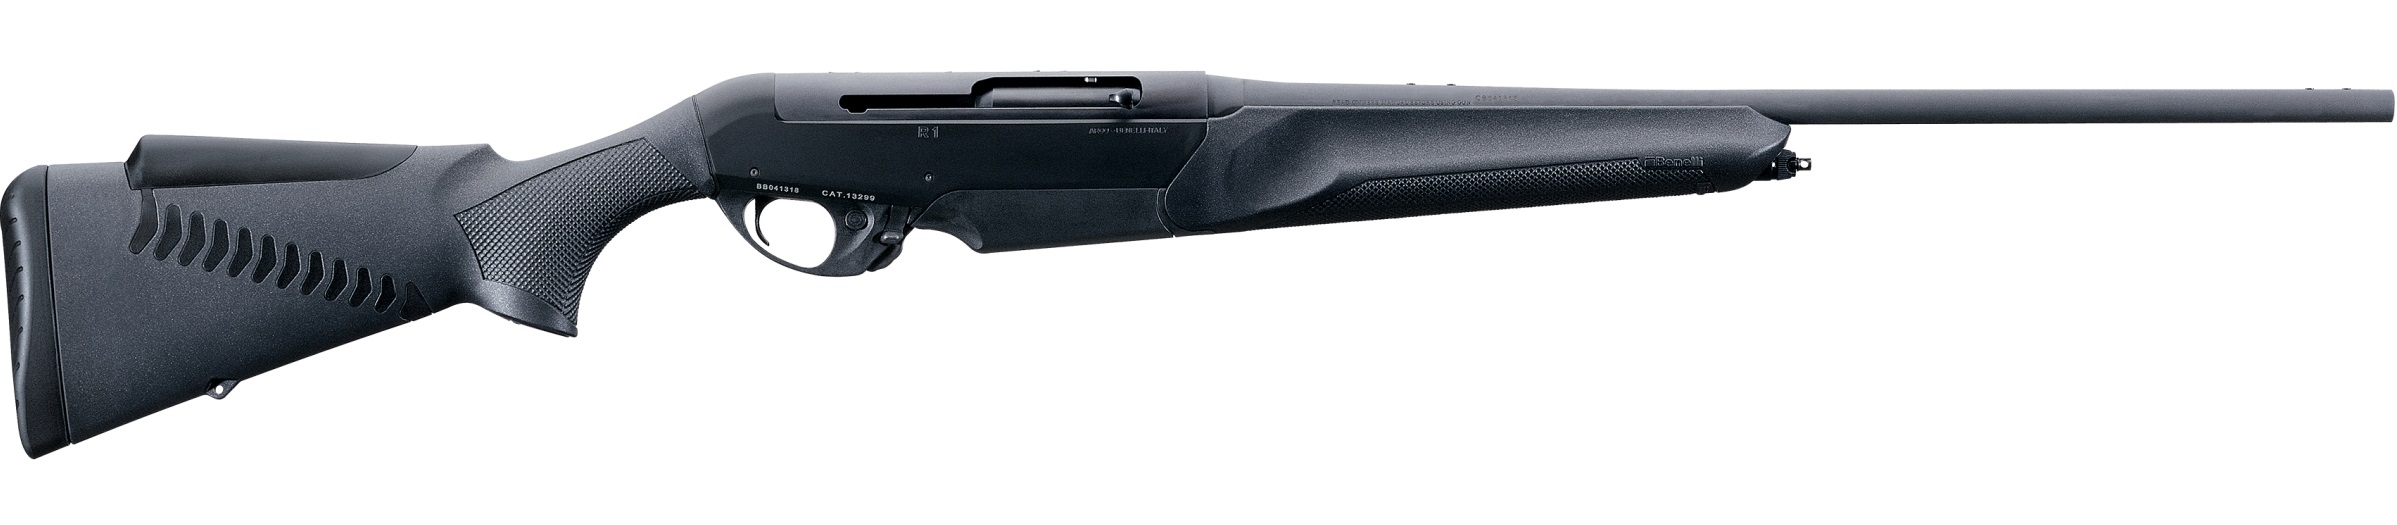 A Benelli rifle built for hunting.